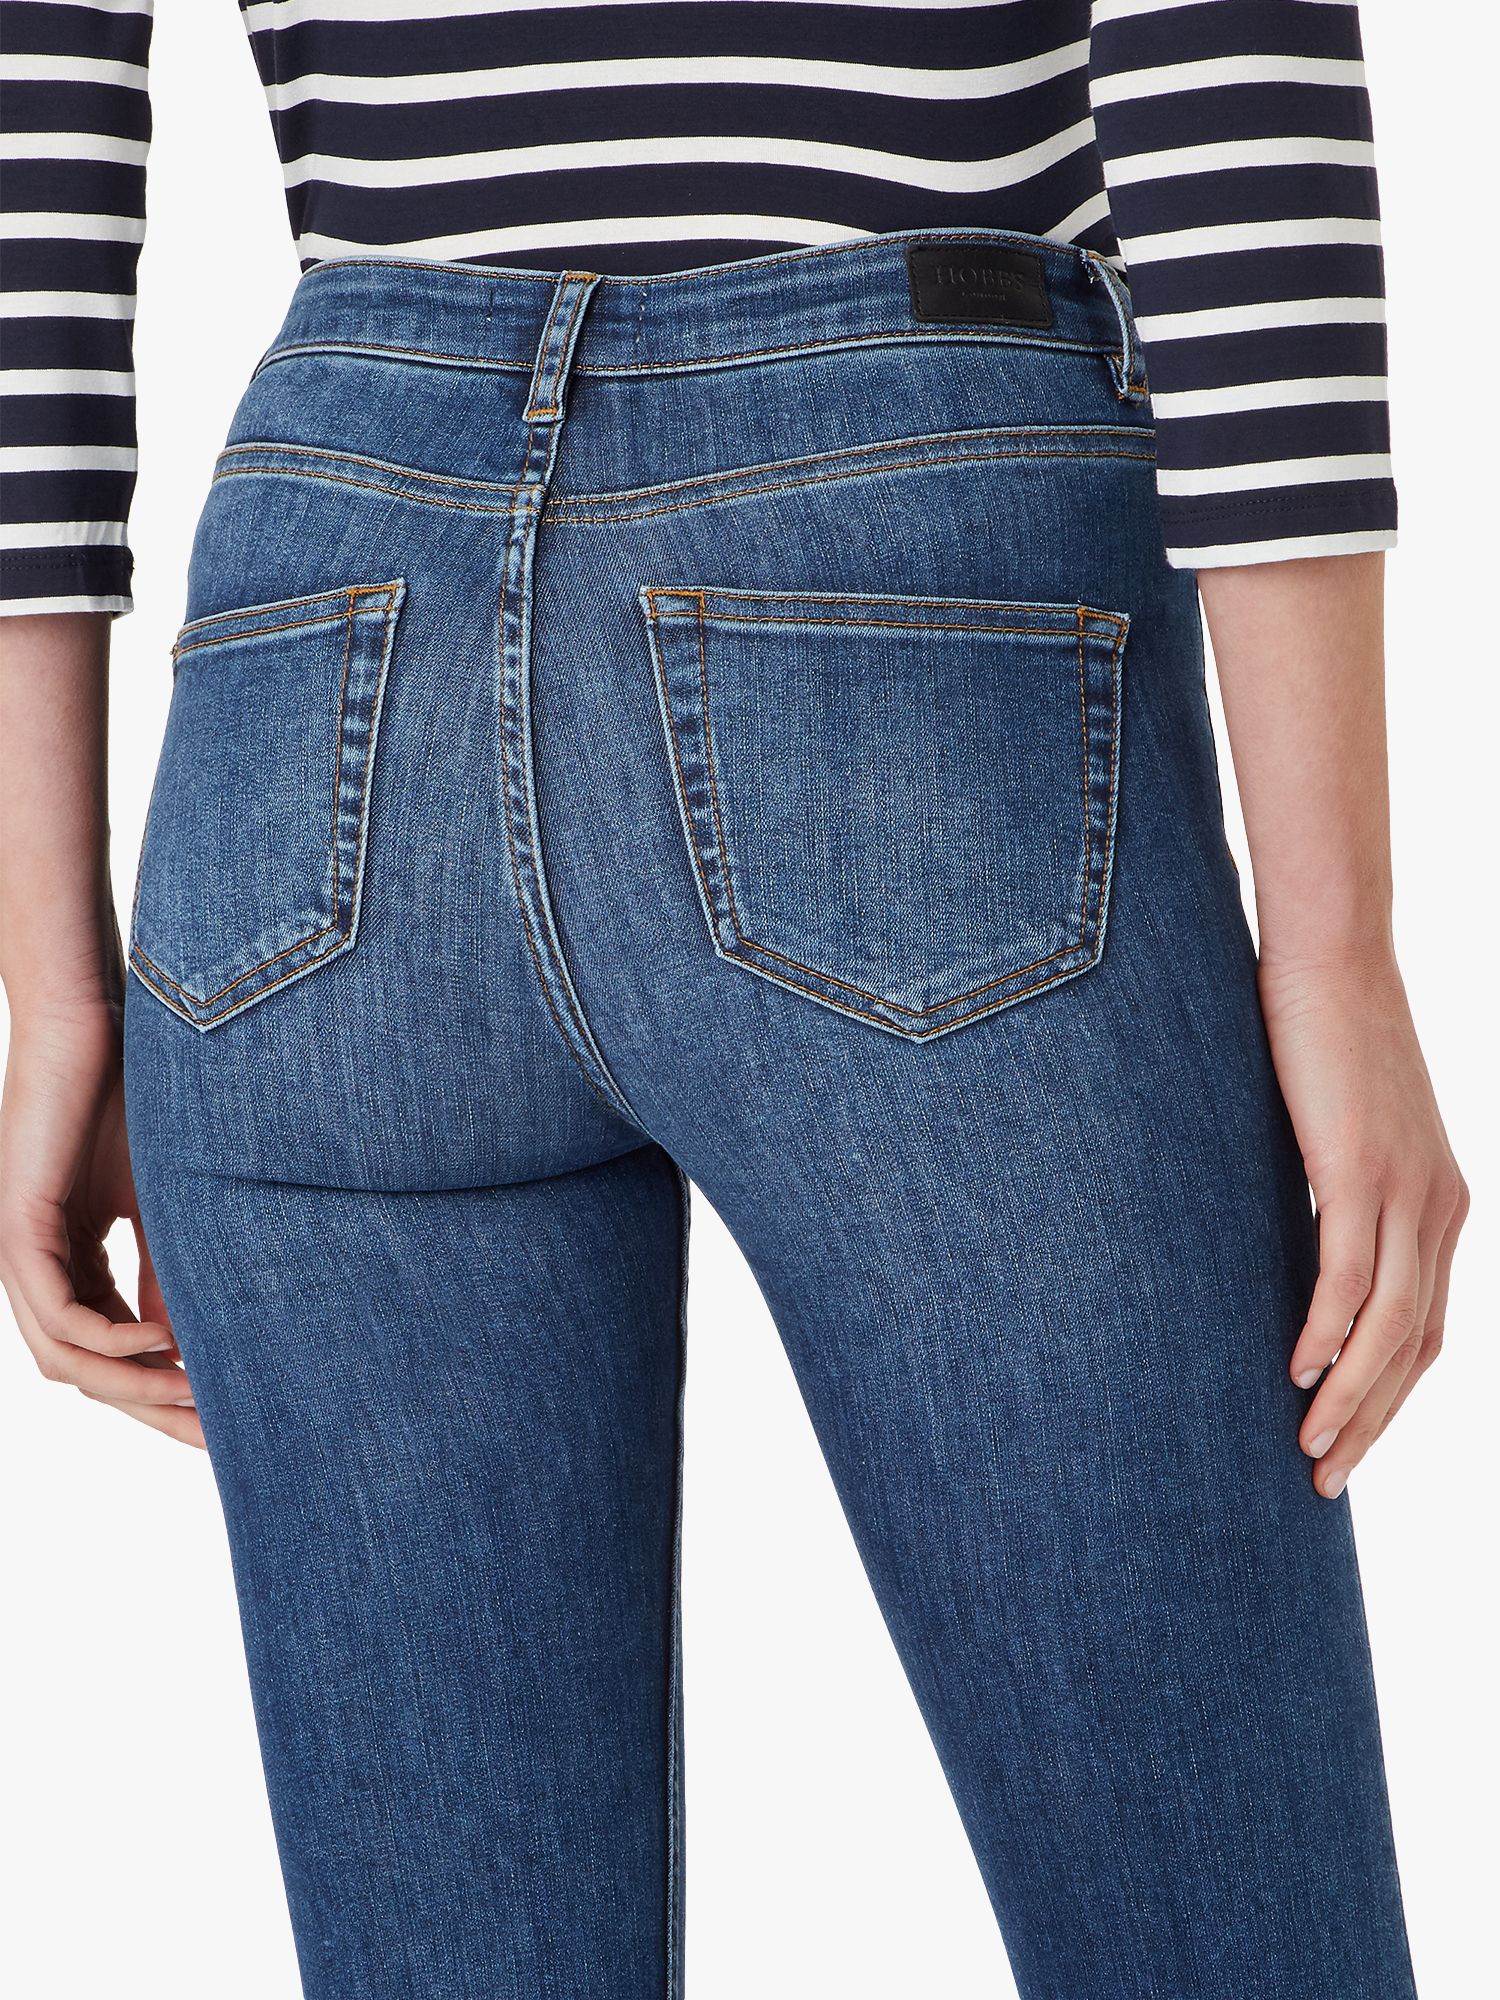 Hobbs Gia Sculpting Jeans, Mid-Wash at John Lewis & Partners